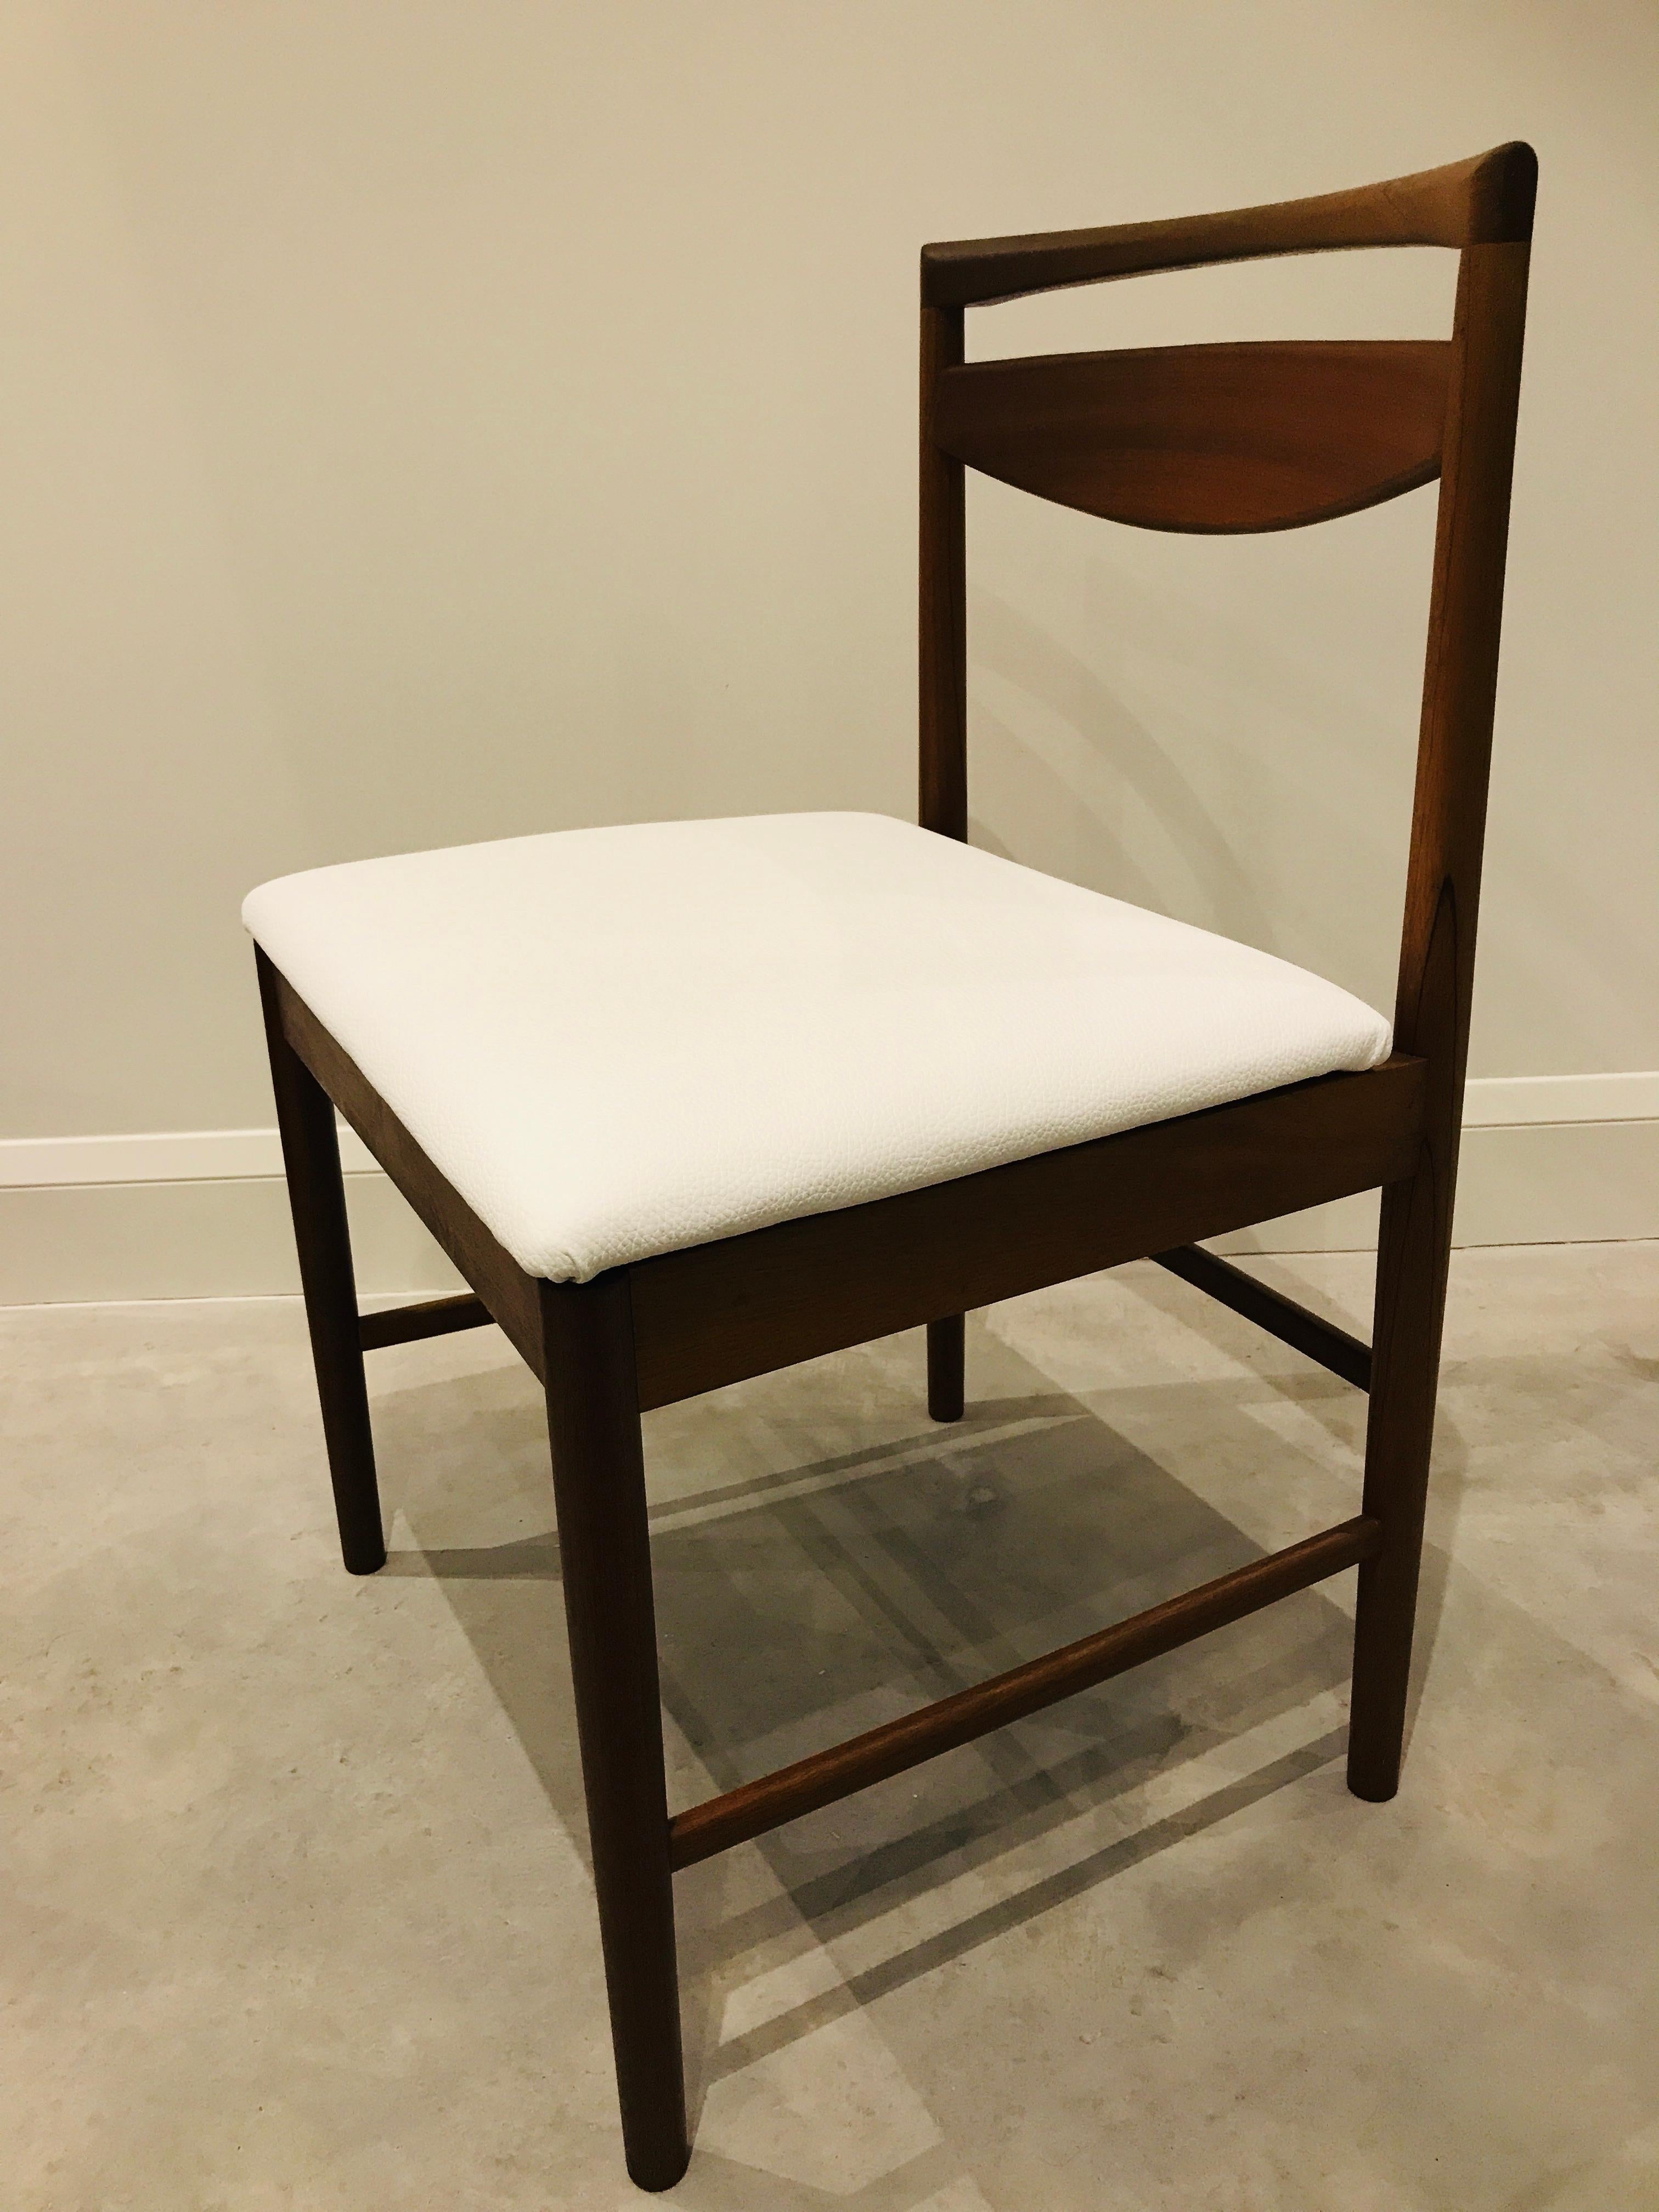 1970 Vintage Teak McIntosh Retro Dining Chairs Upholstered in White Leather For Sale 5